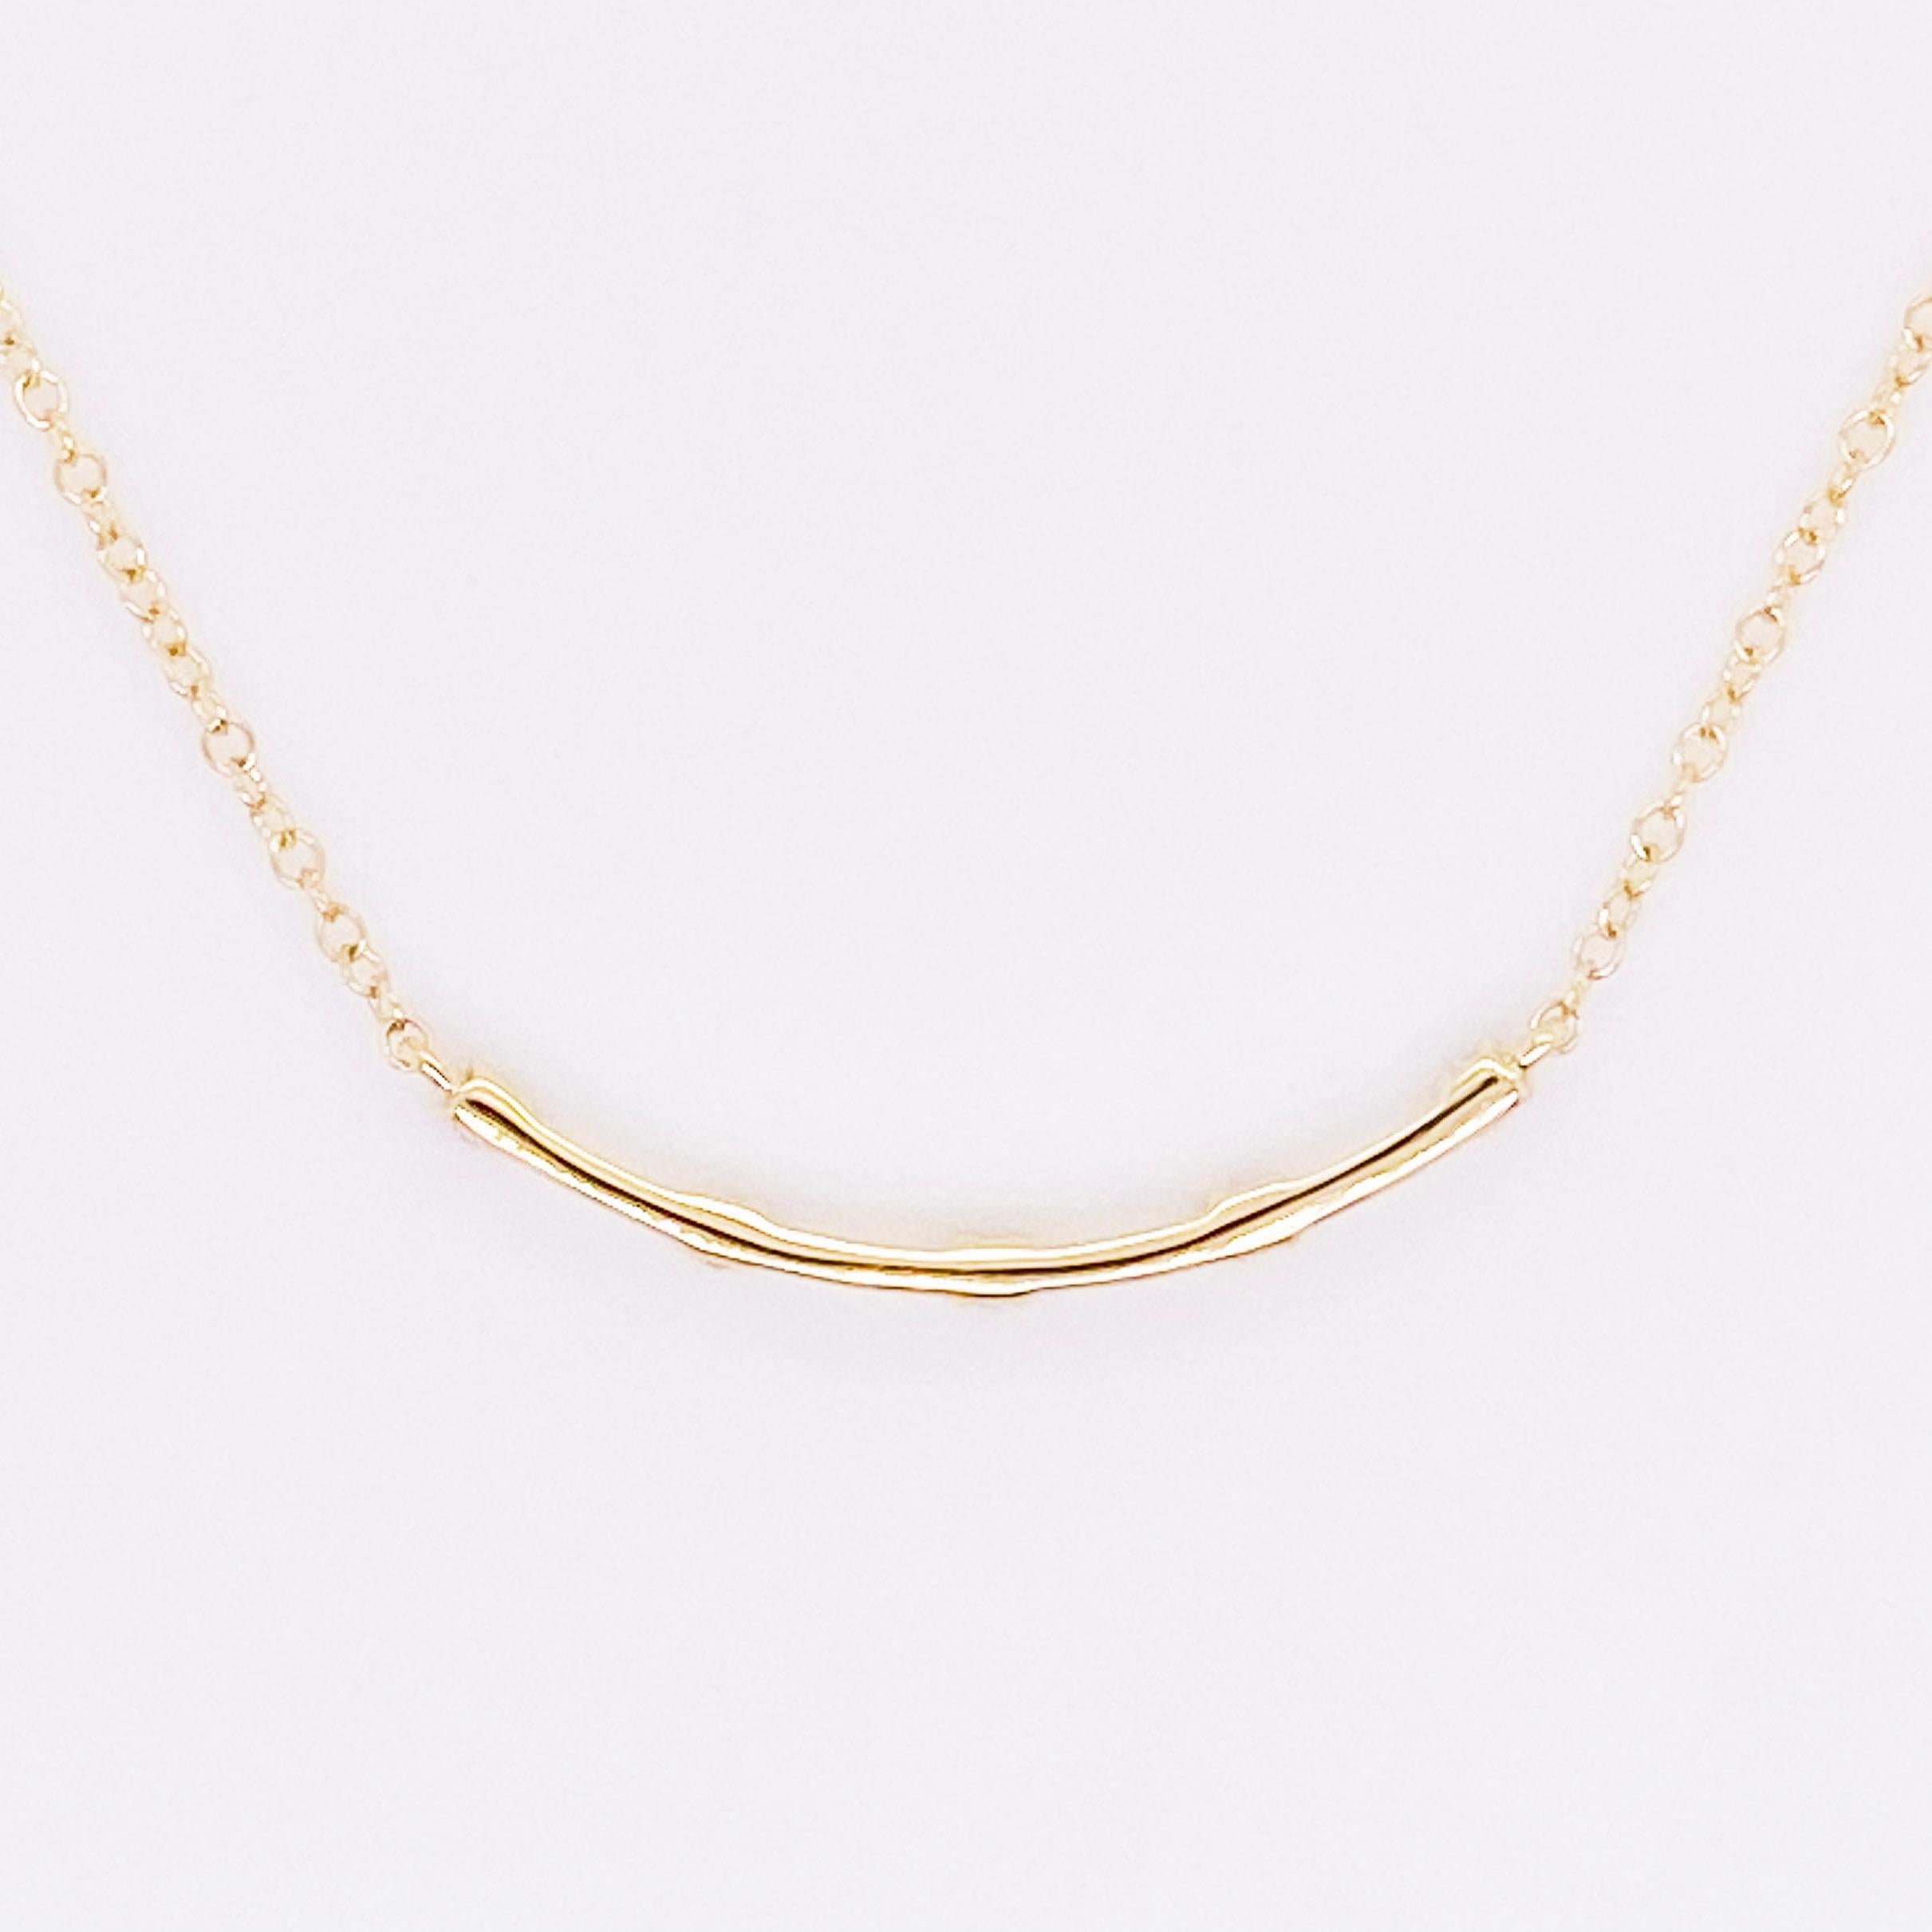 Diamond Bar Necklace, 14 Karat Yellow Gold, Curved Bar Necklace, NK6137Y45JJ In New Condition For Sale In Austin, TX